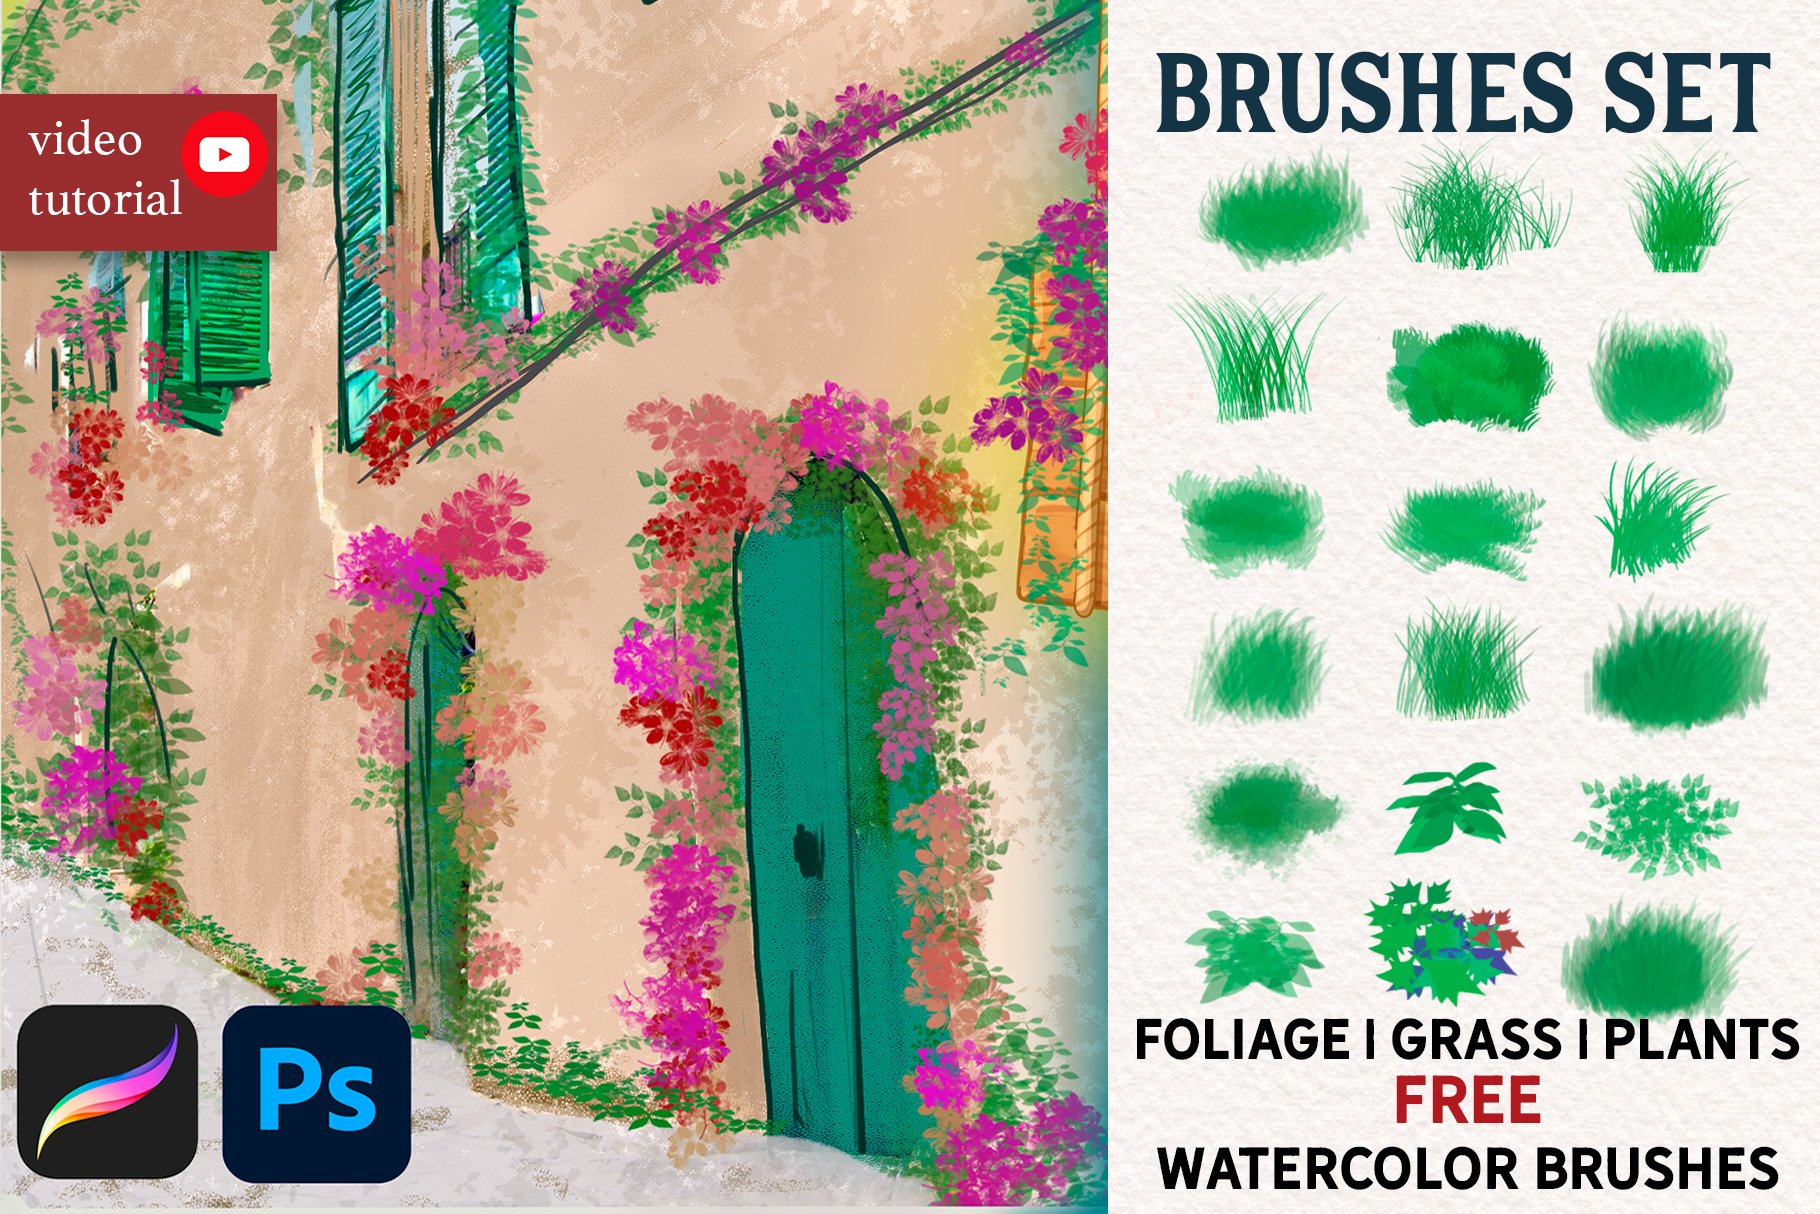 Foliage Grass Watercolor FREE BRUSHcover image.